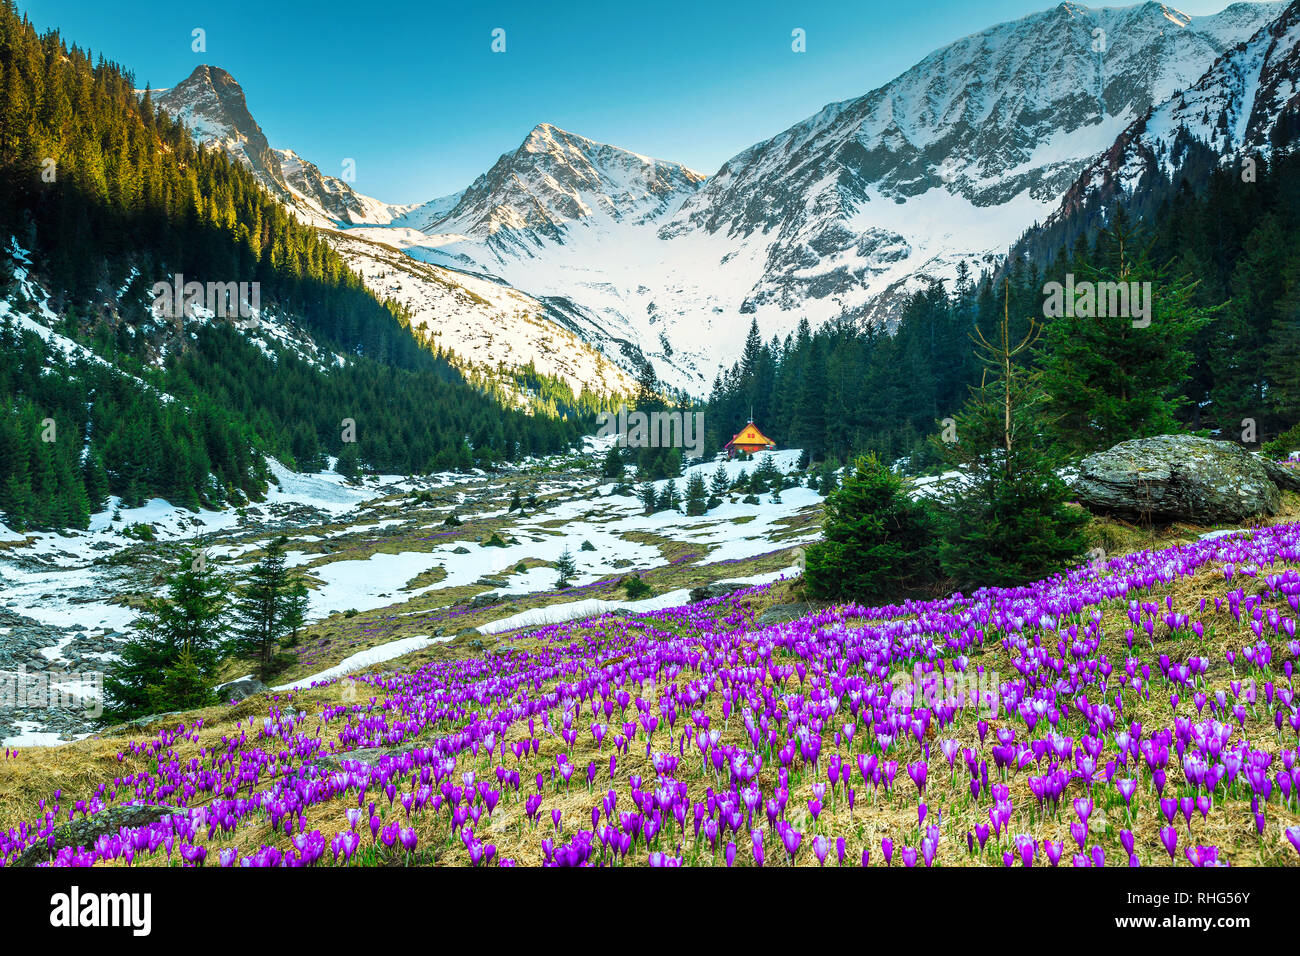 Admirable alpine spring landscape, stunning field with fresh colorful purple crocus flowers and high snowy mountains in background, Fagaras mountains, Stock Photo